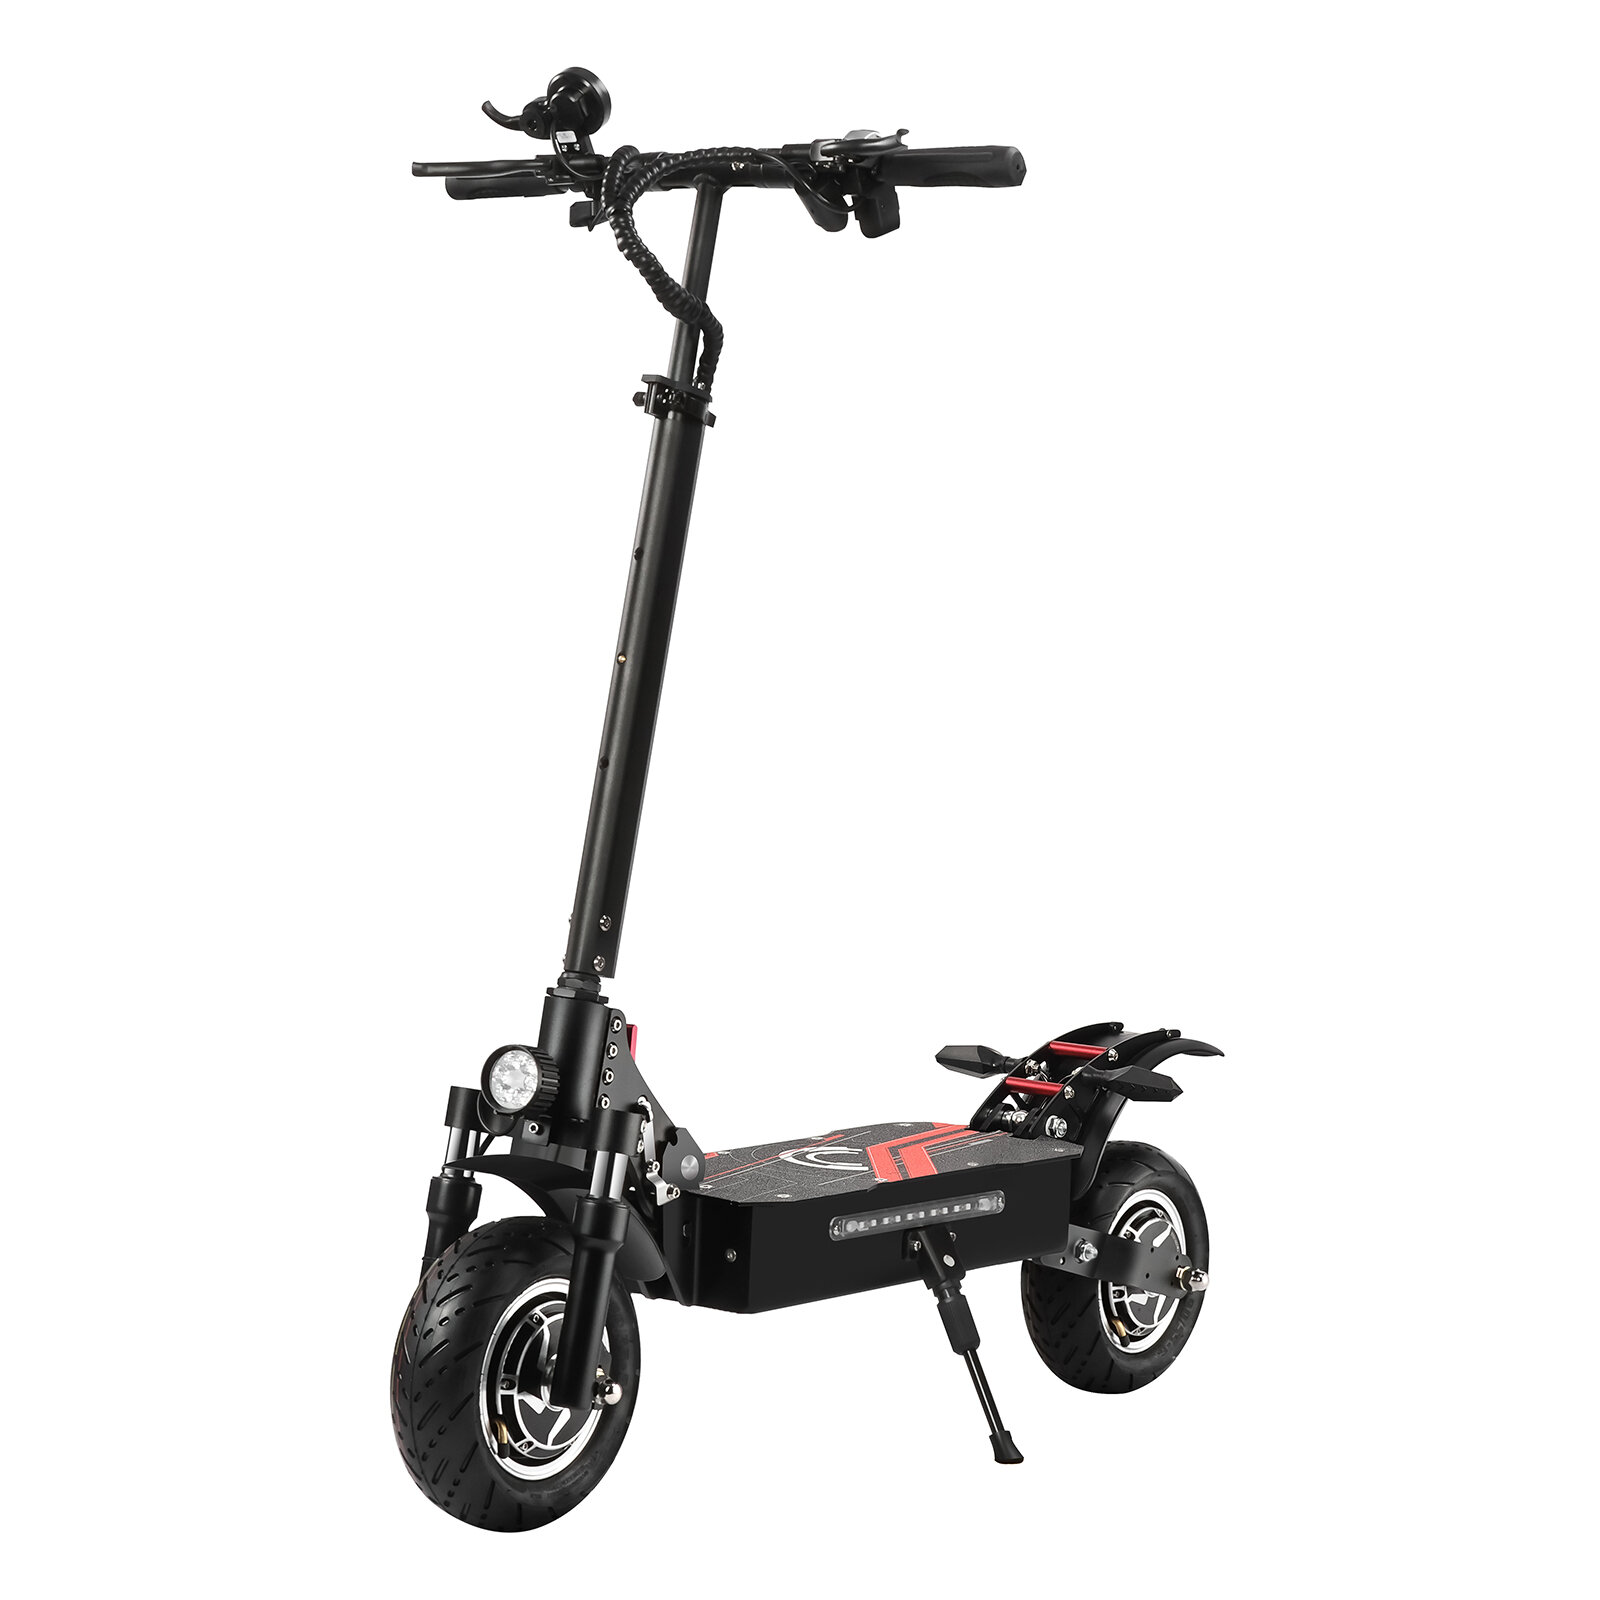 best price,boyueda,q7pro,52v,19ah,1600wx2,10,inch,electric,scooter,eu,coupon,price,discount